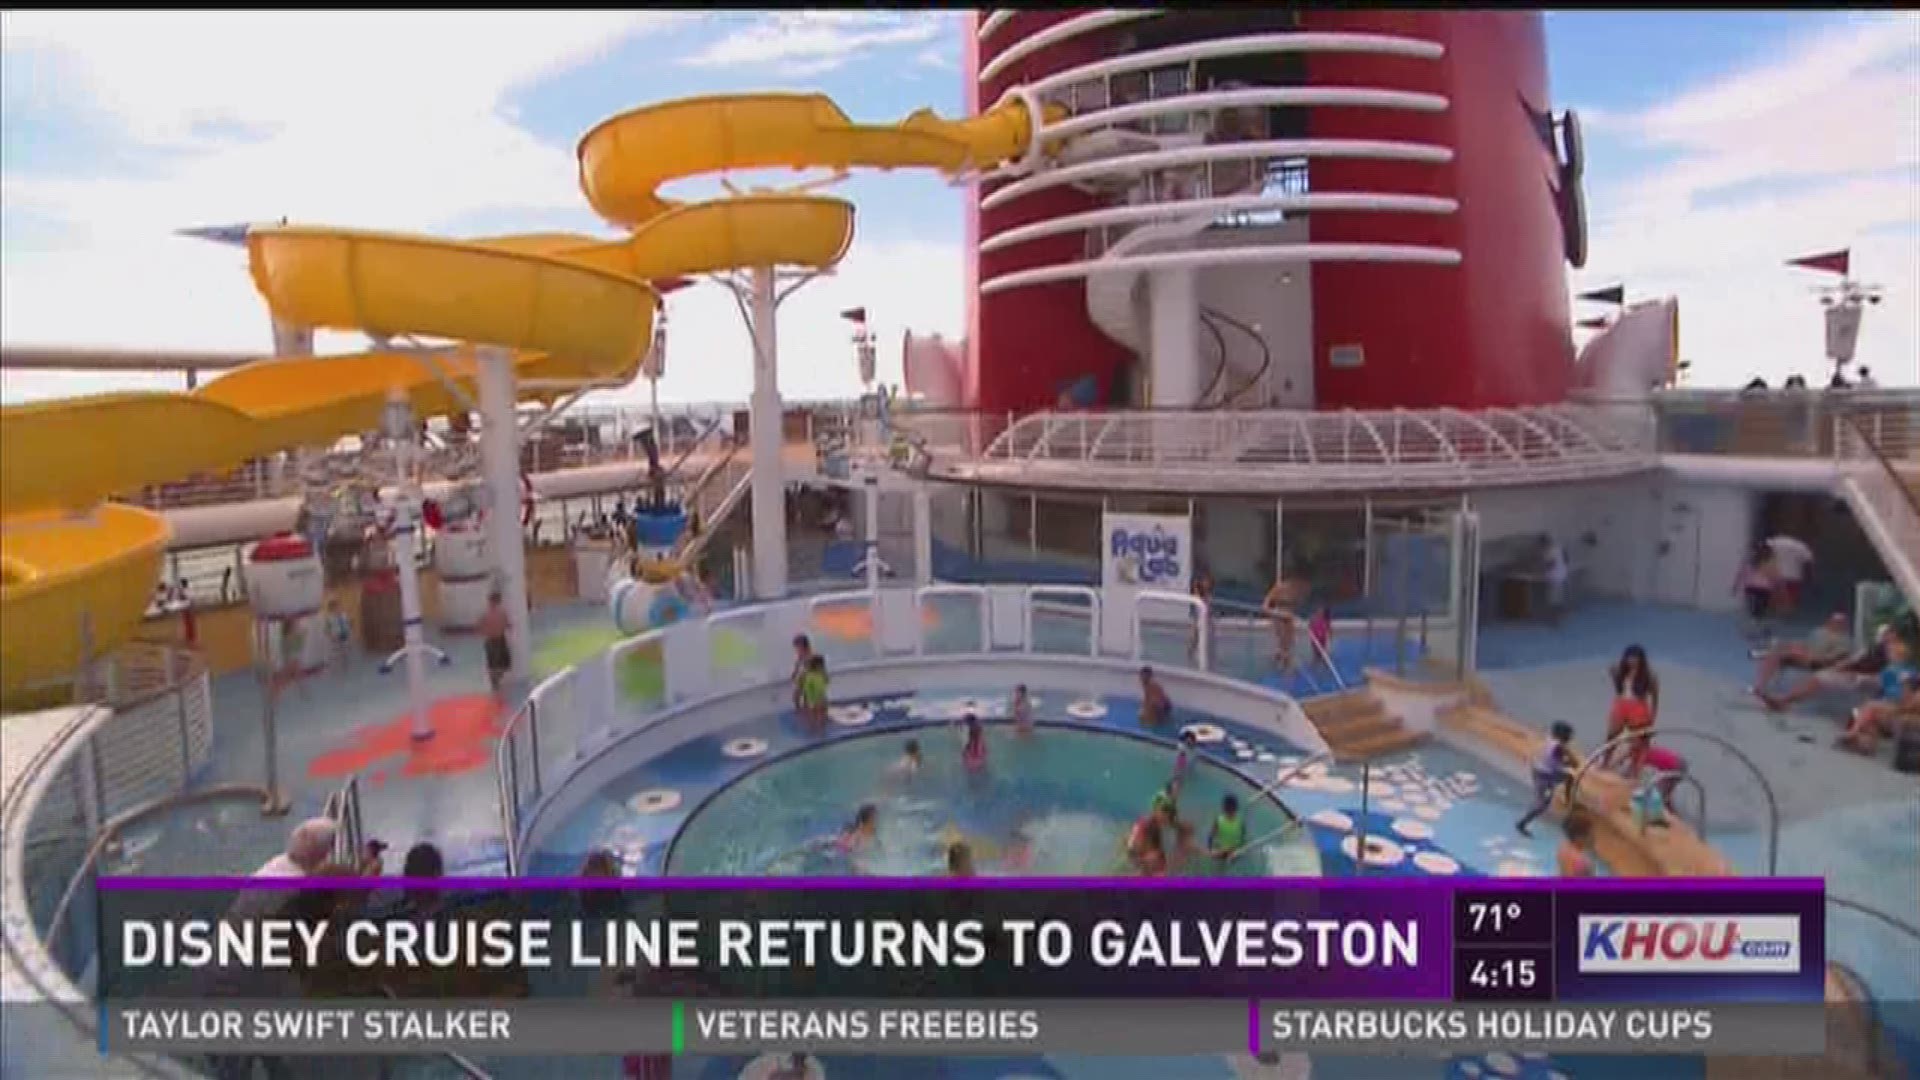 Good news if you want to take a Disney cruise out of Galveston